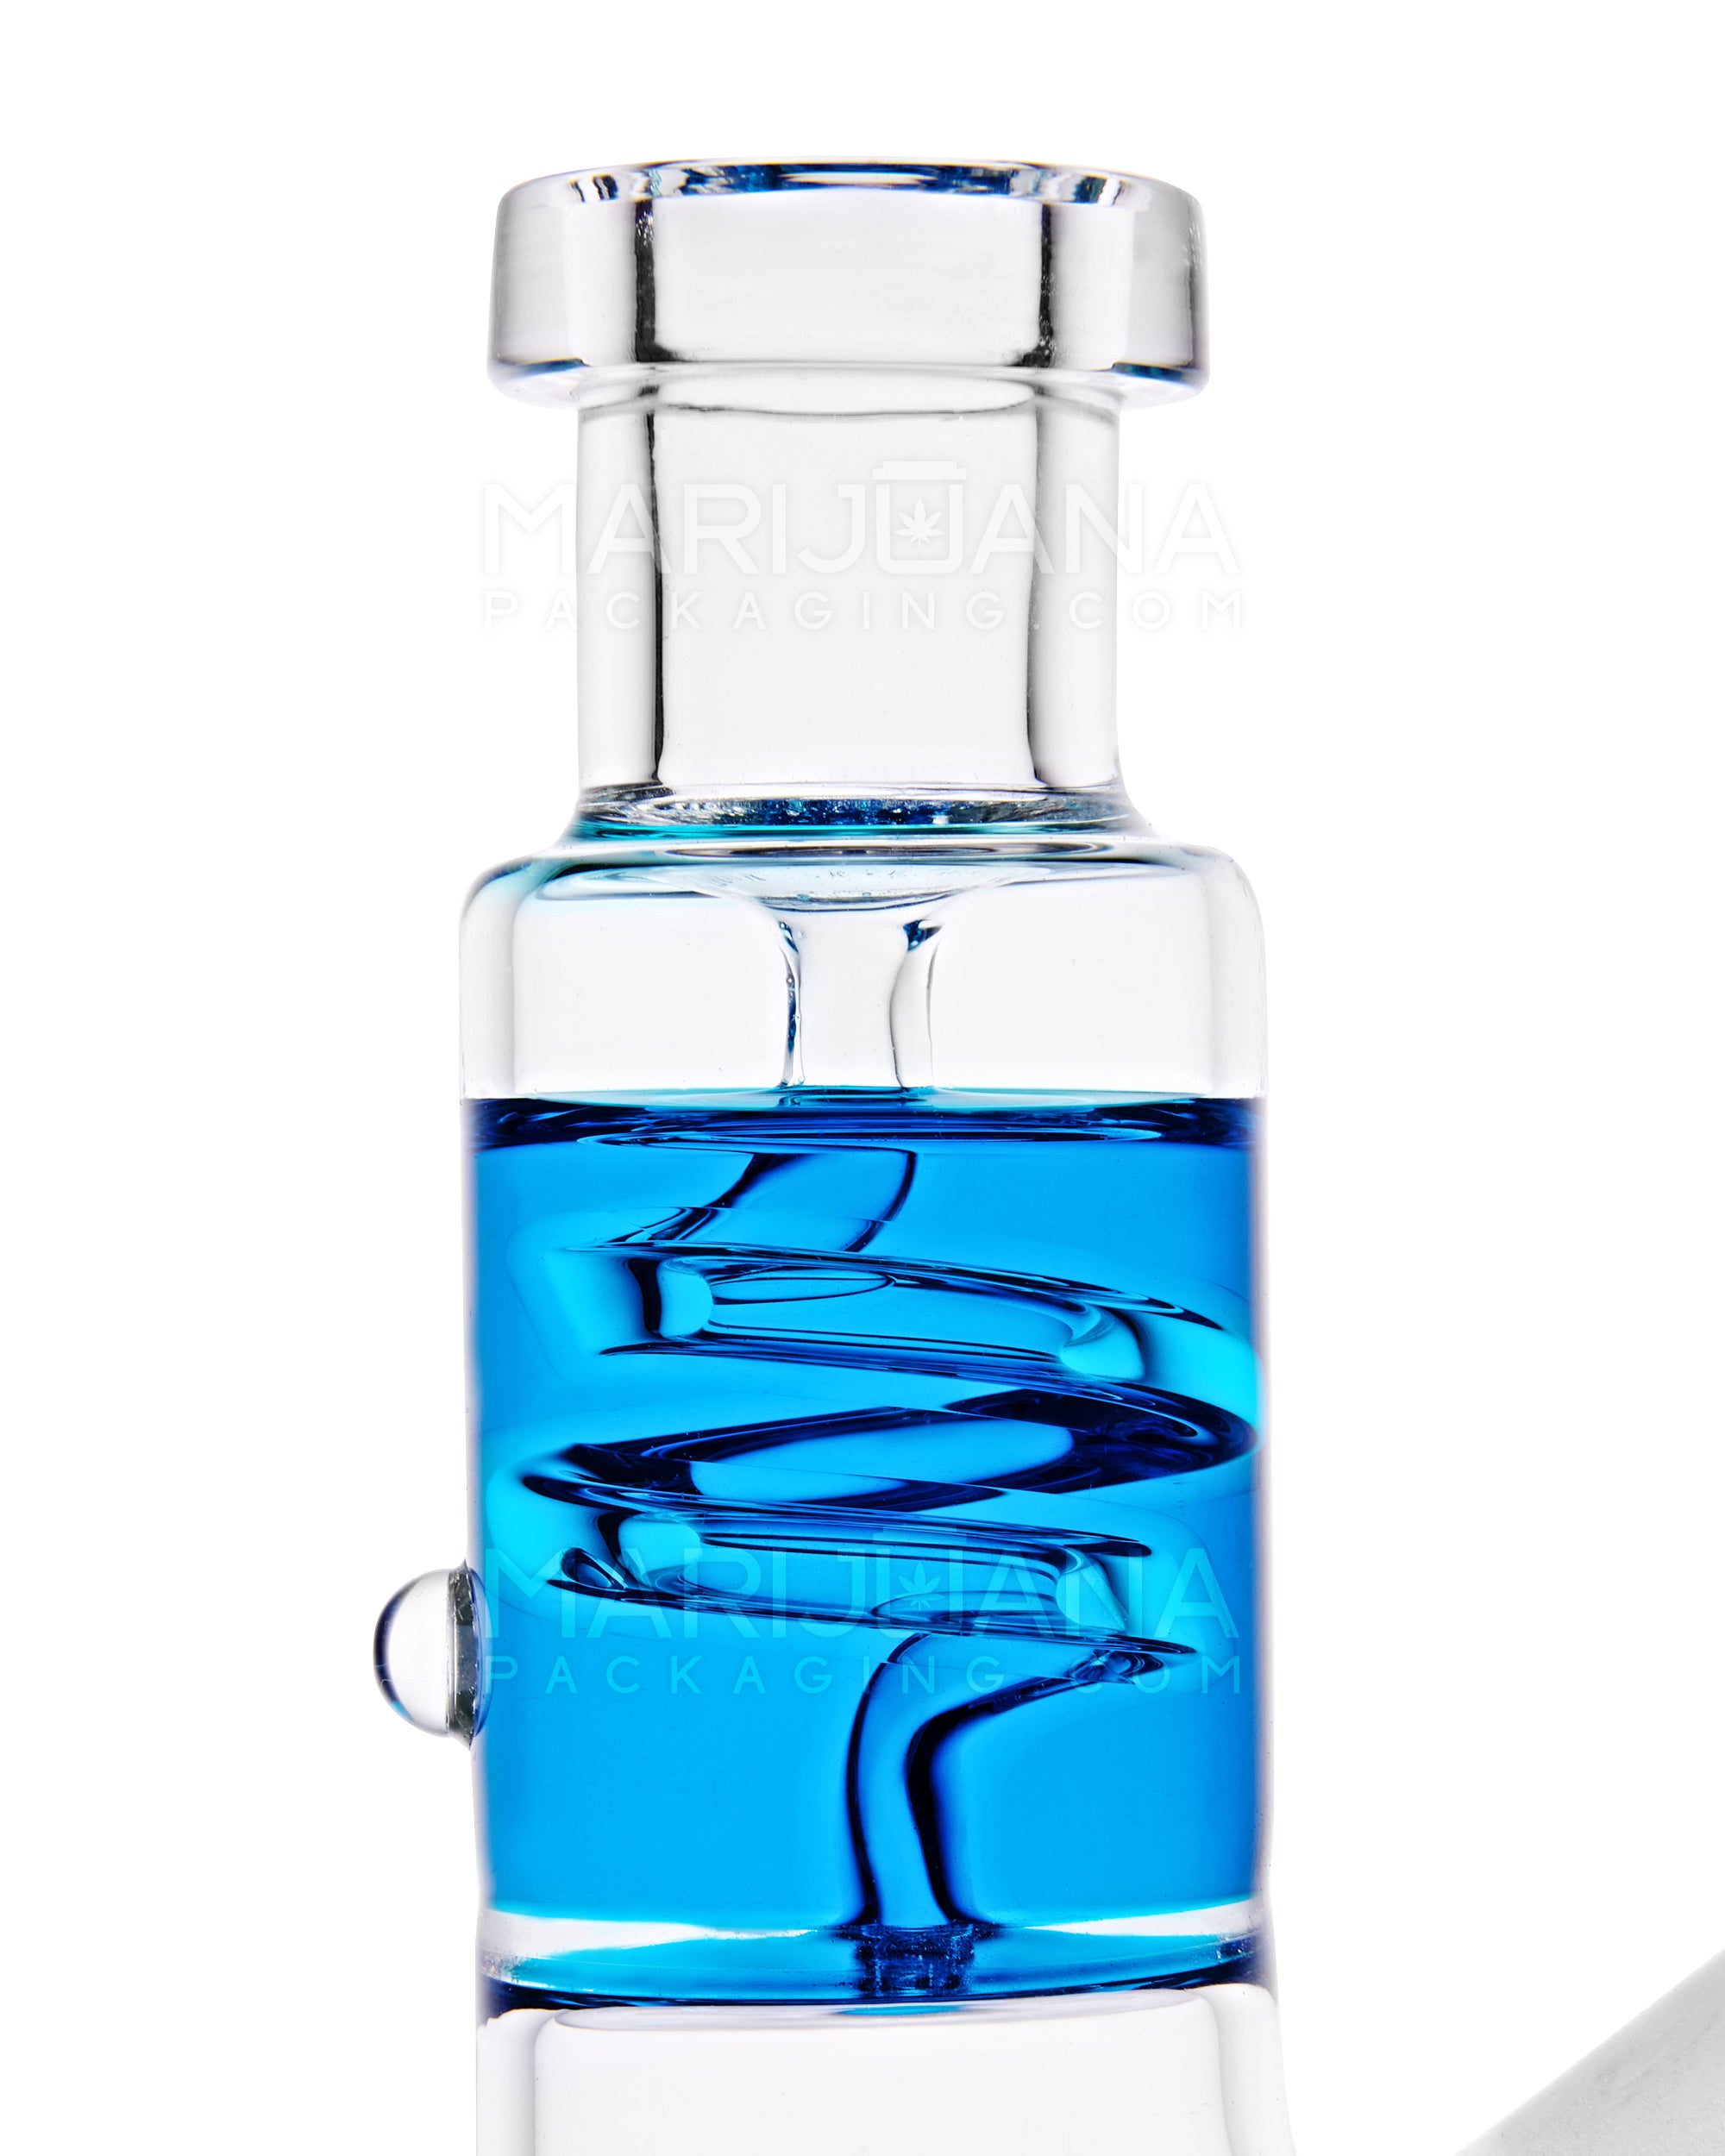 Glycerin Coil Mini Straight Tube Water Pipe | 6in Long - Glass - Blue